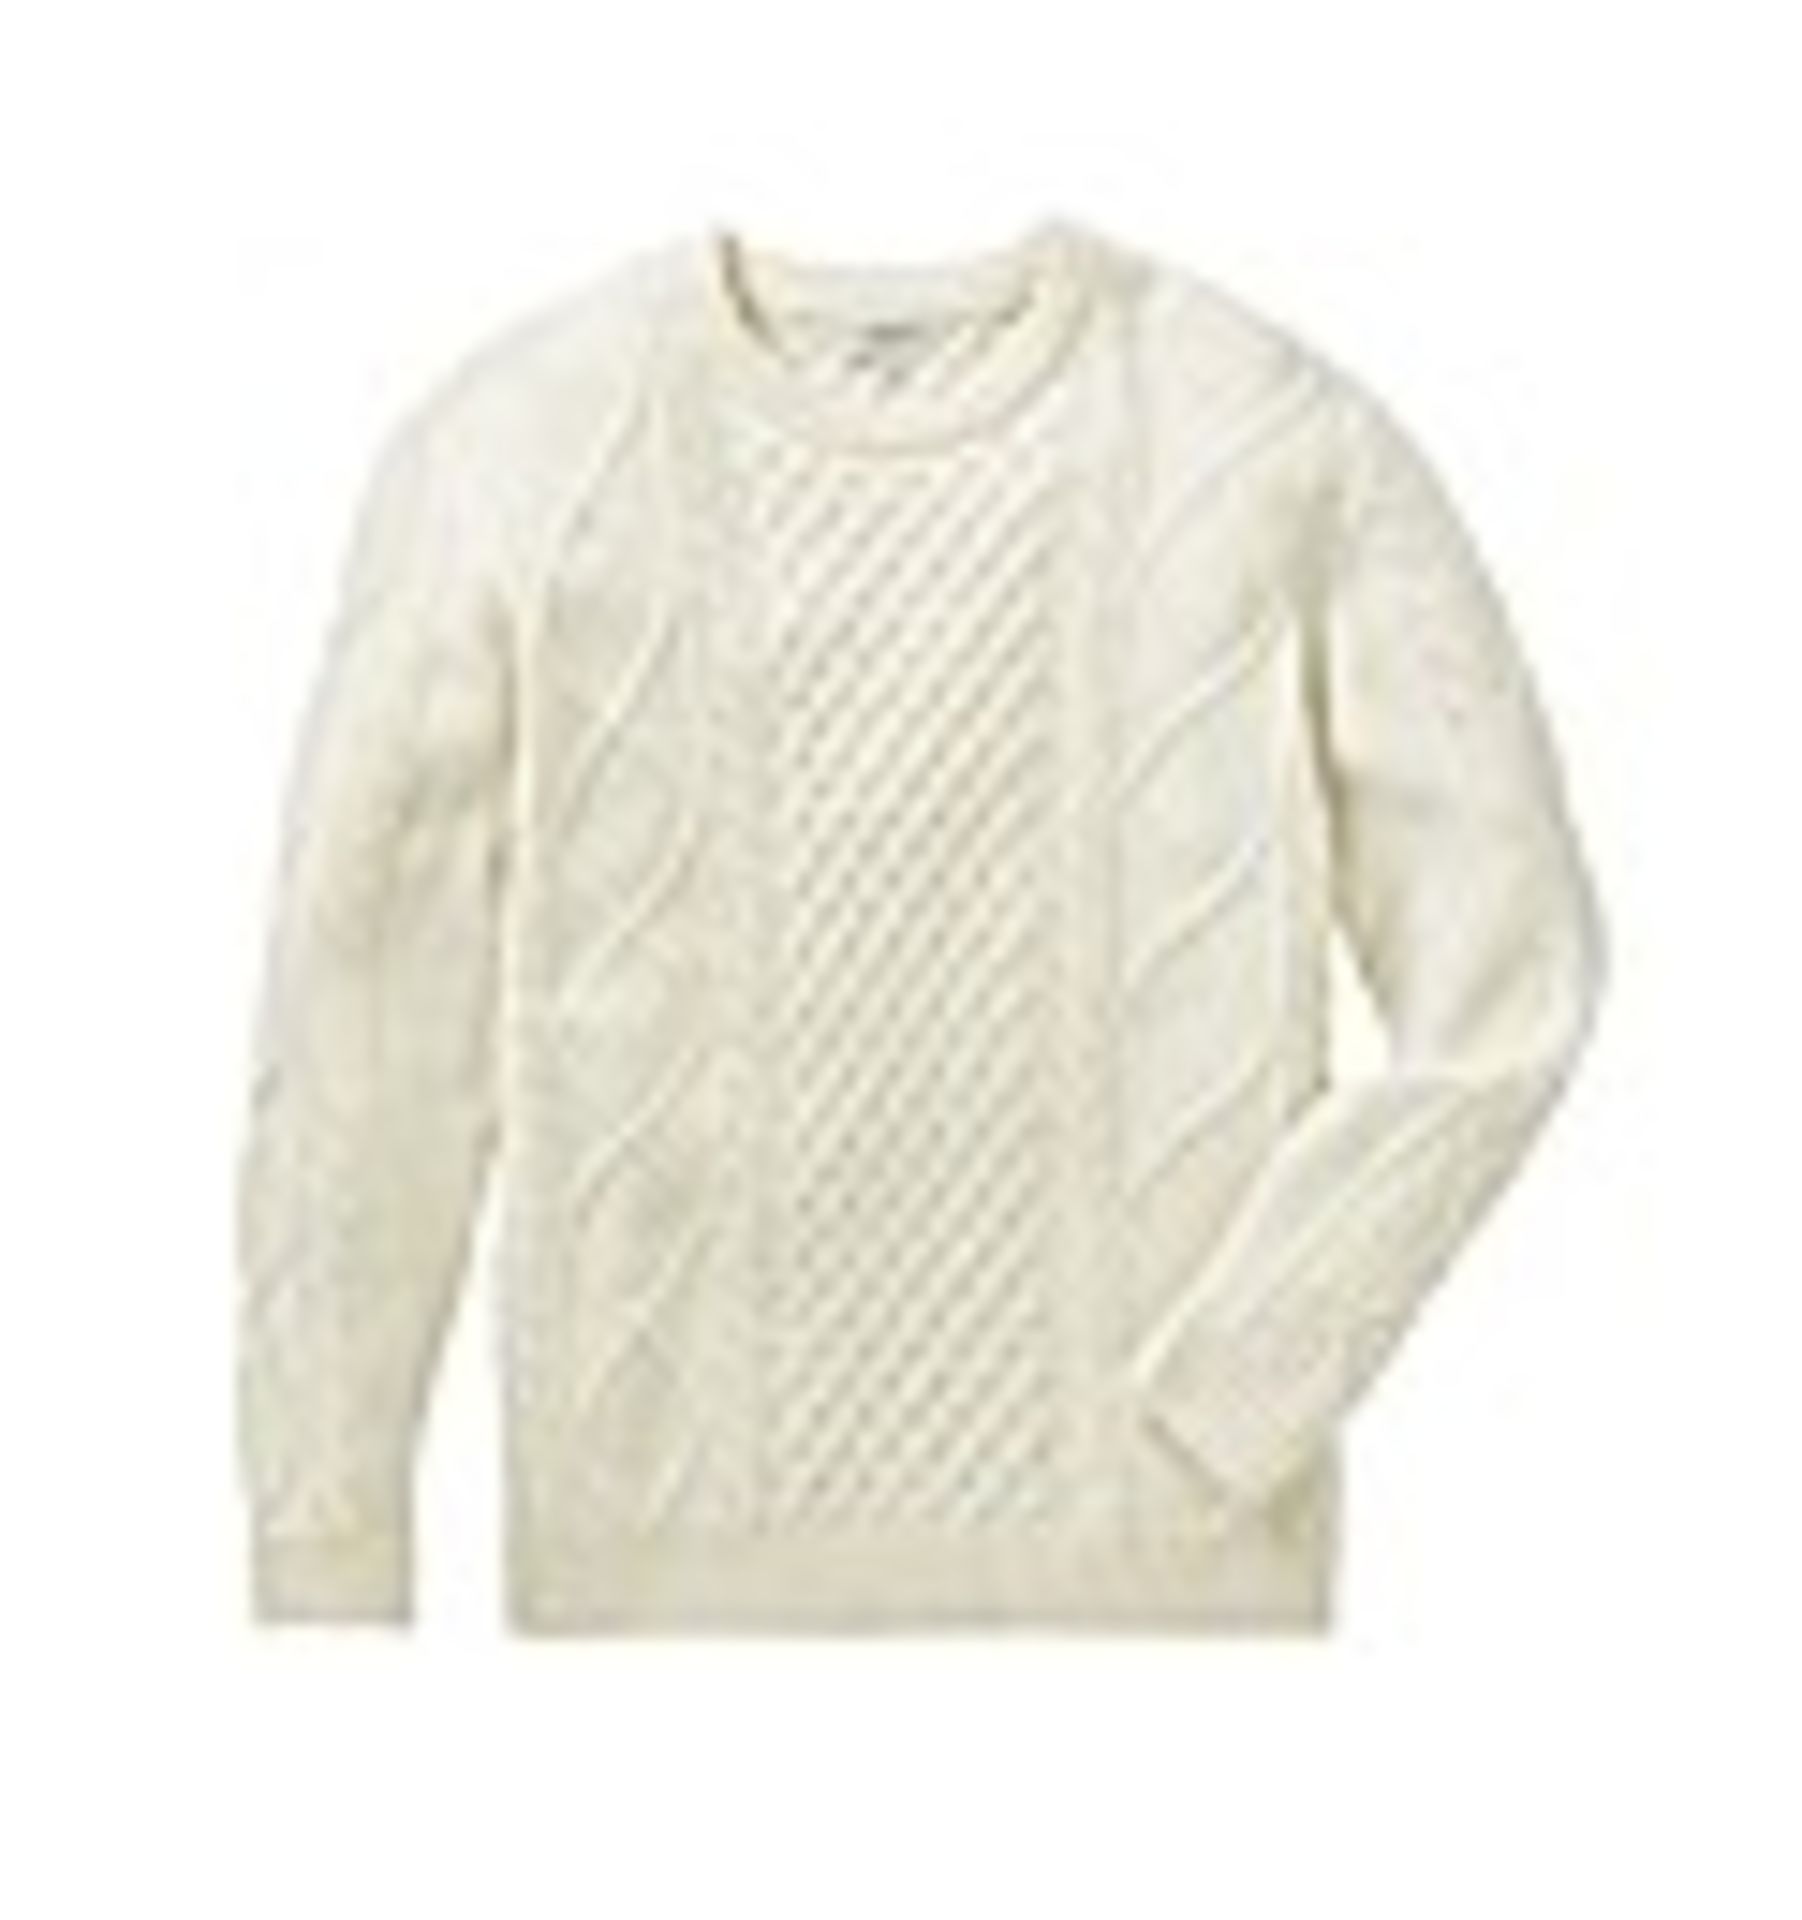 BRAND NEW FF CABLE KNIT CREAM SIZE 5XL RRP £40Condition ReportBRAND NEW